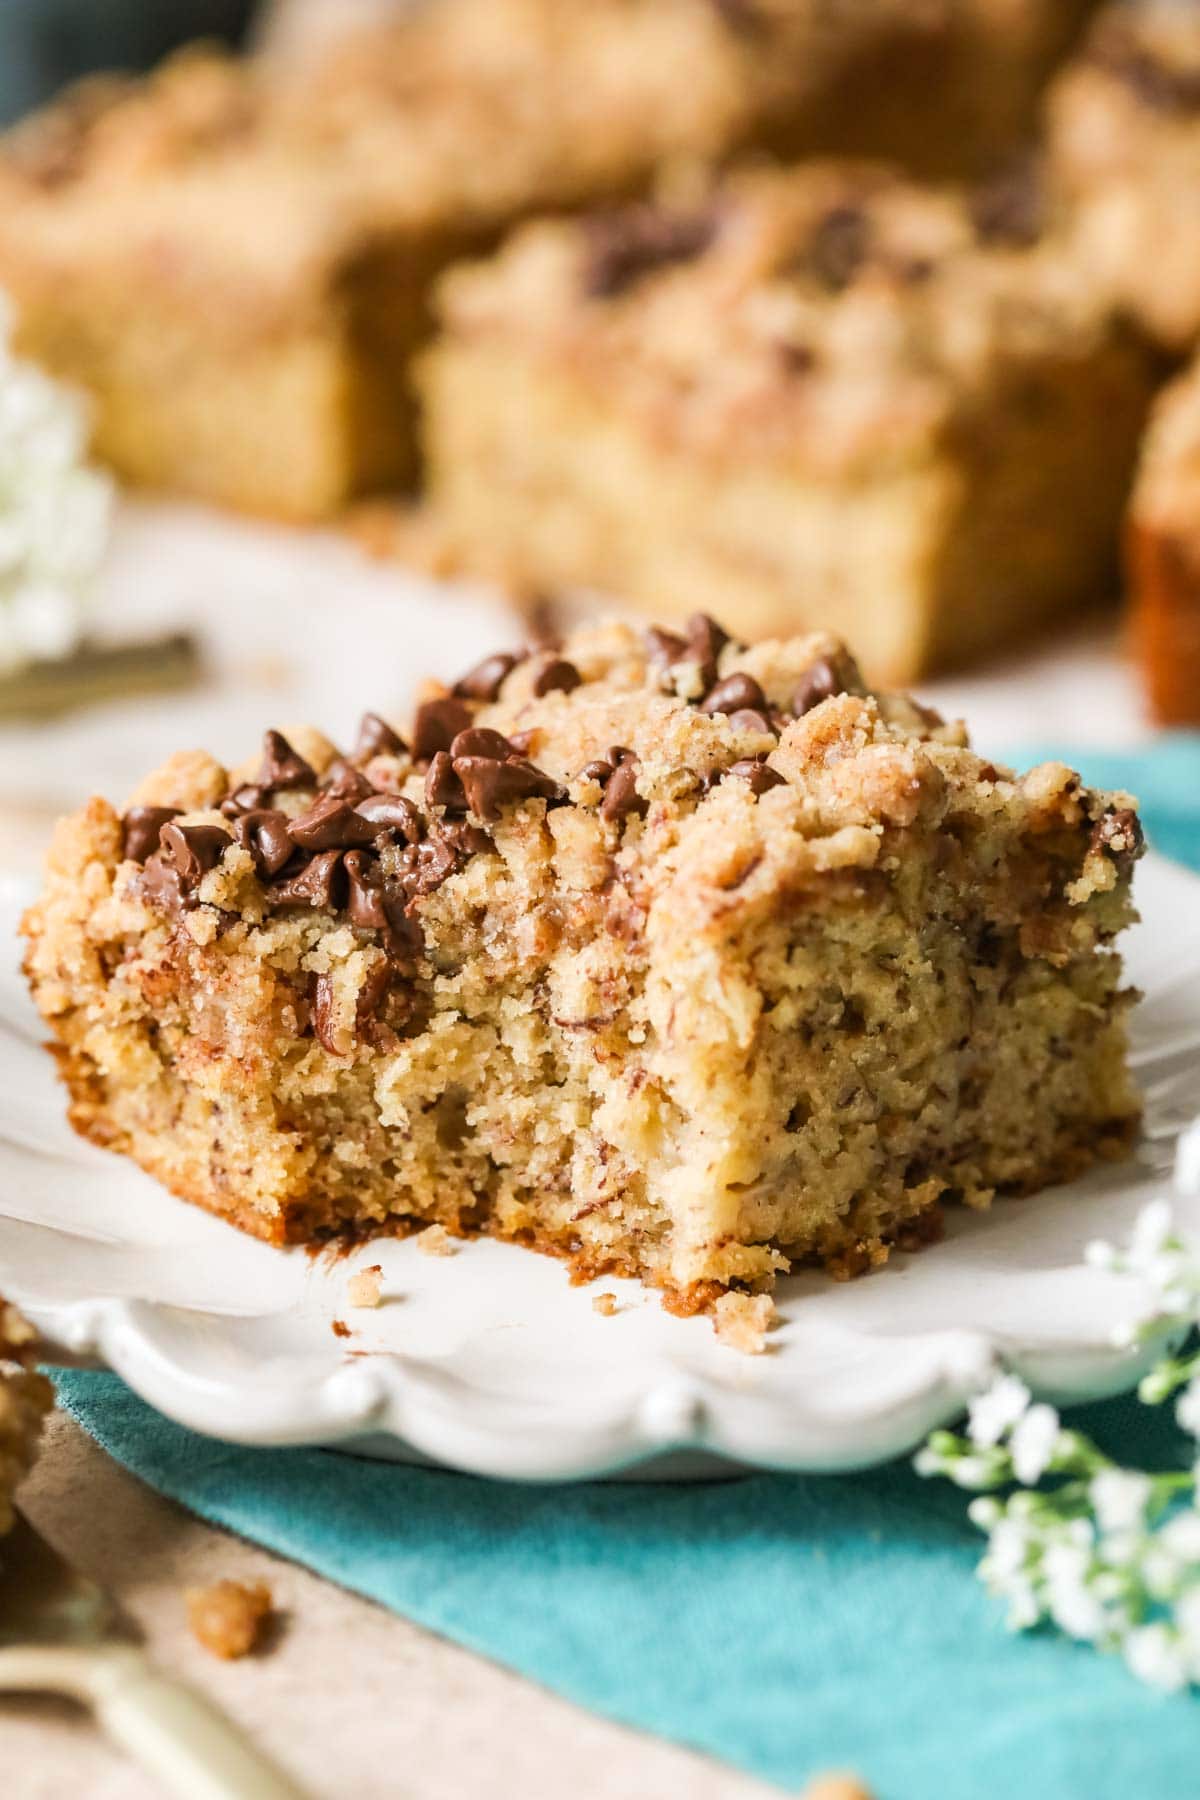 Slice of streusel and chocolate chip topped banana coffee cake on a white plate with one bite missing.